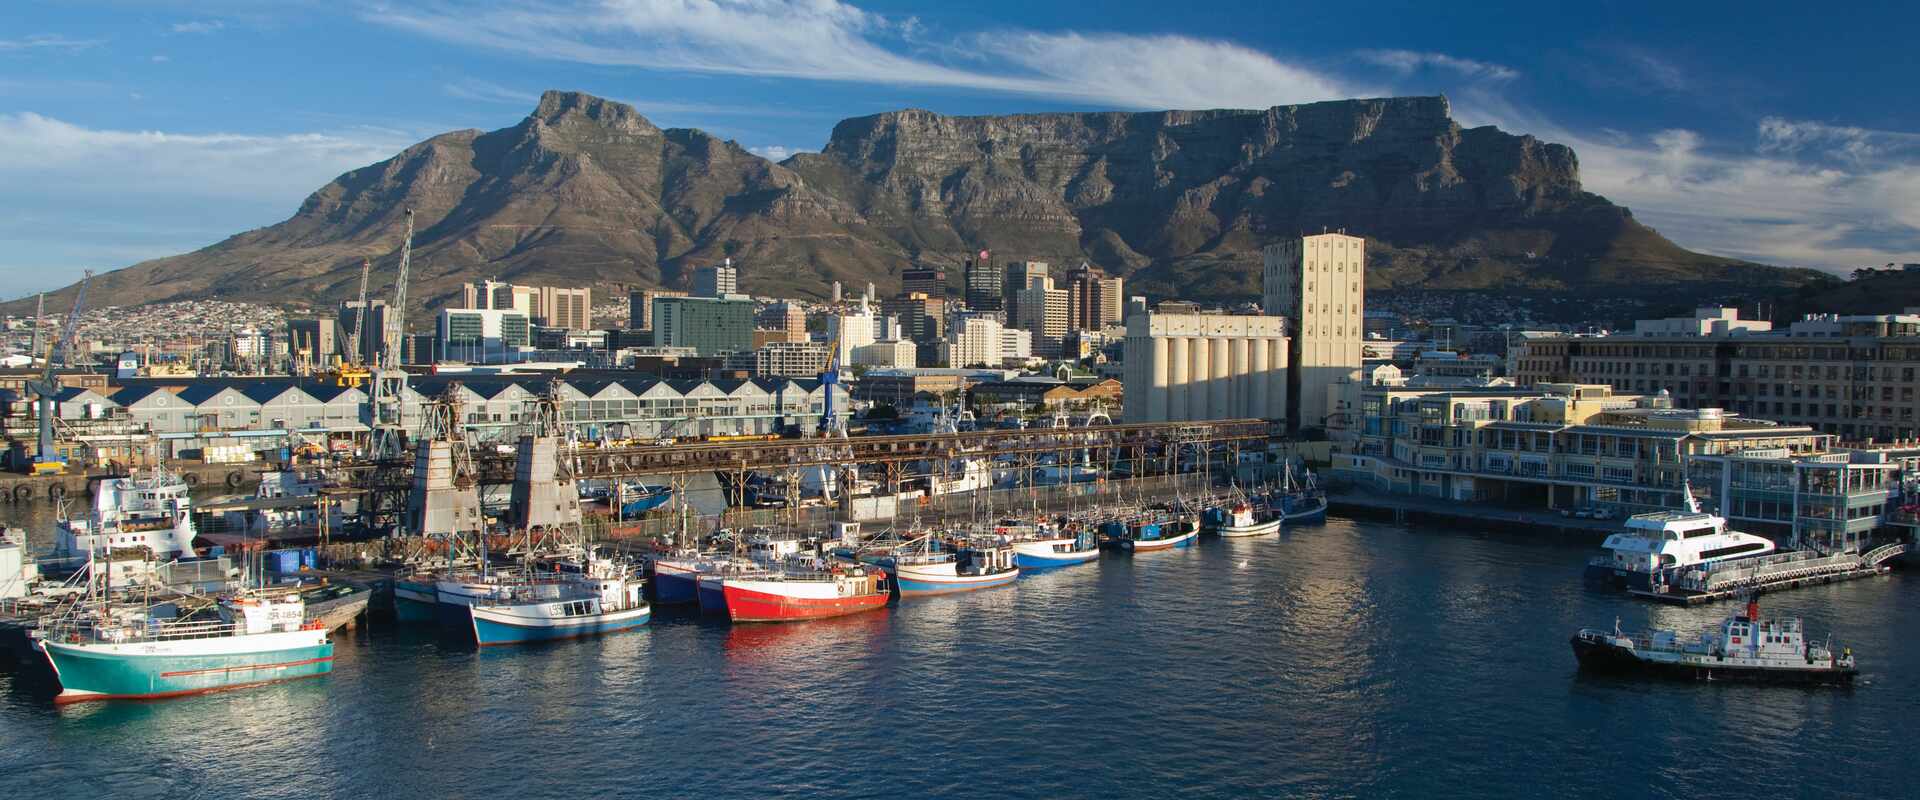 Cape town Waterfront, South Africa